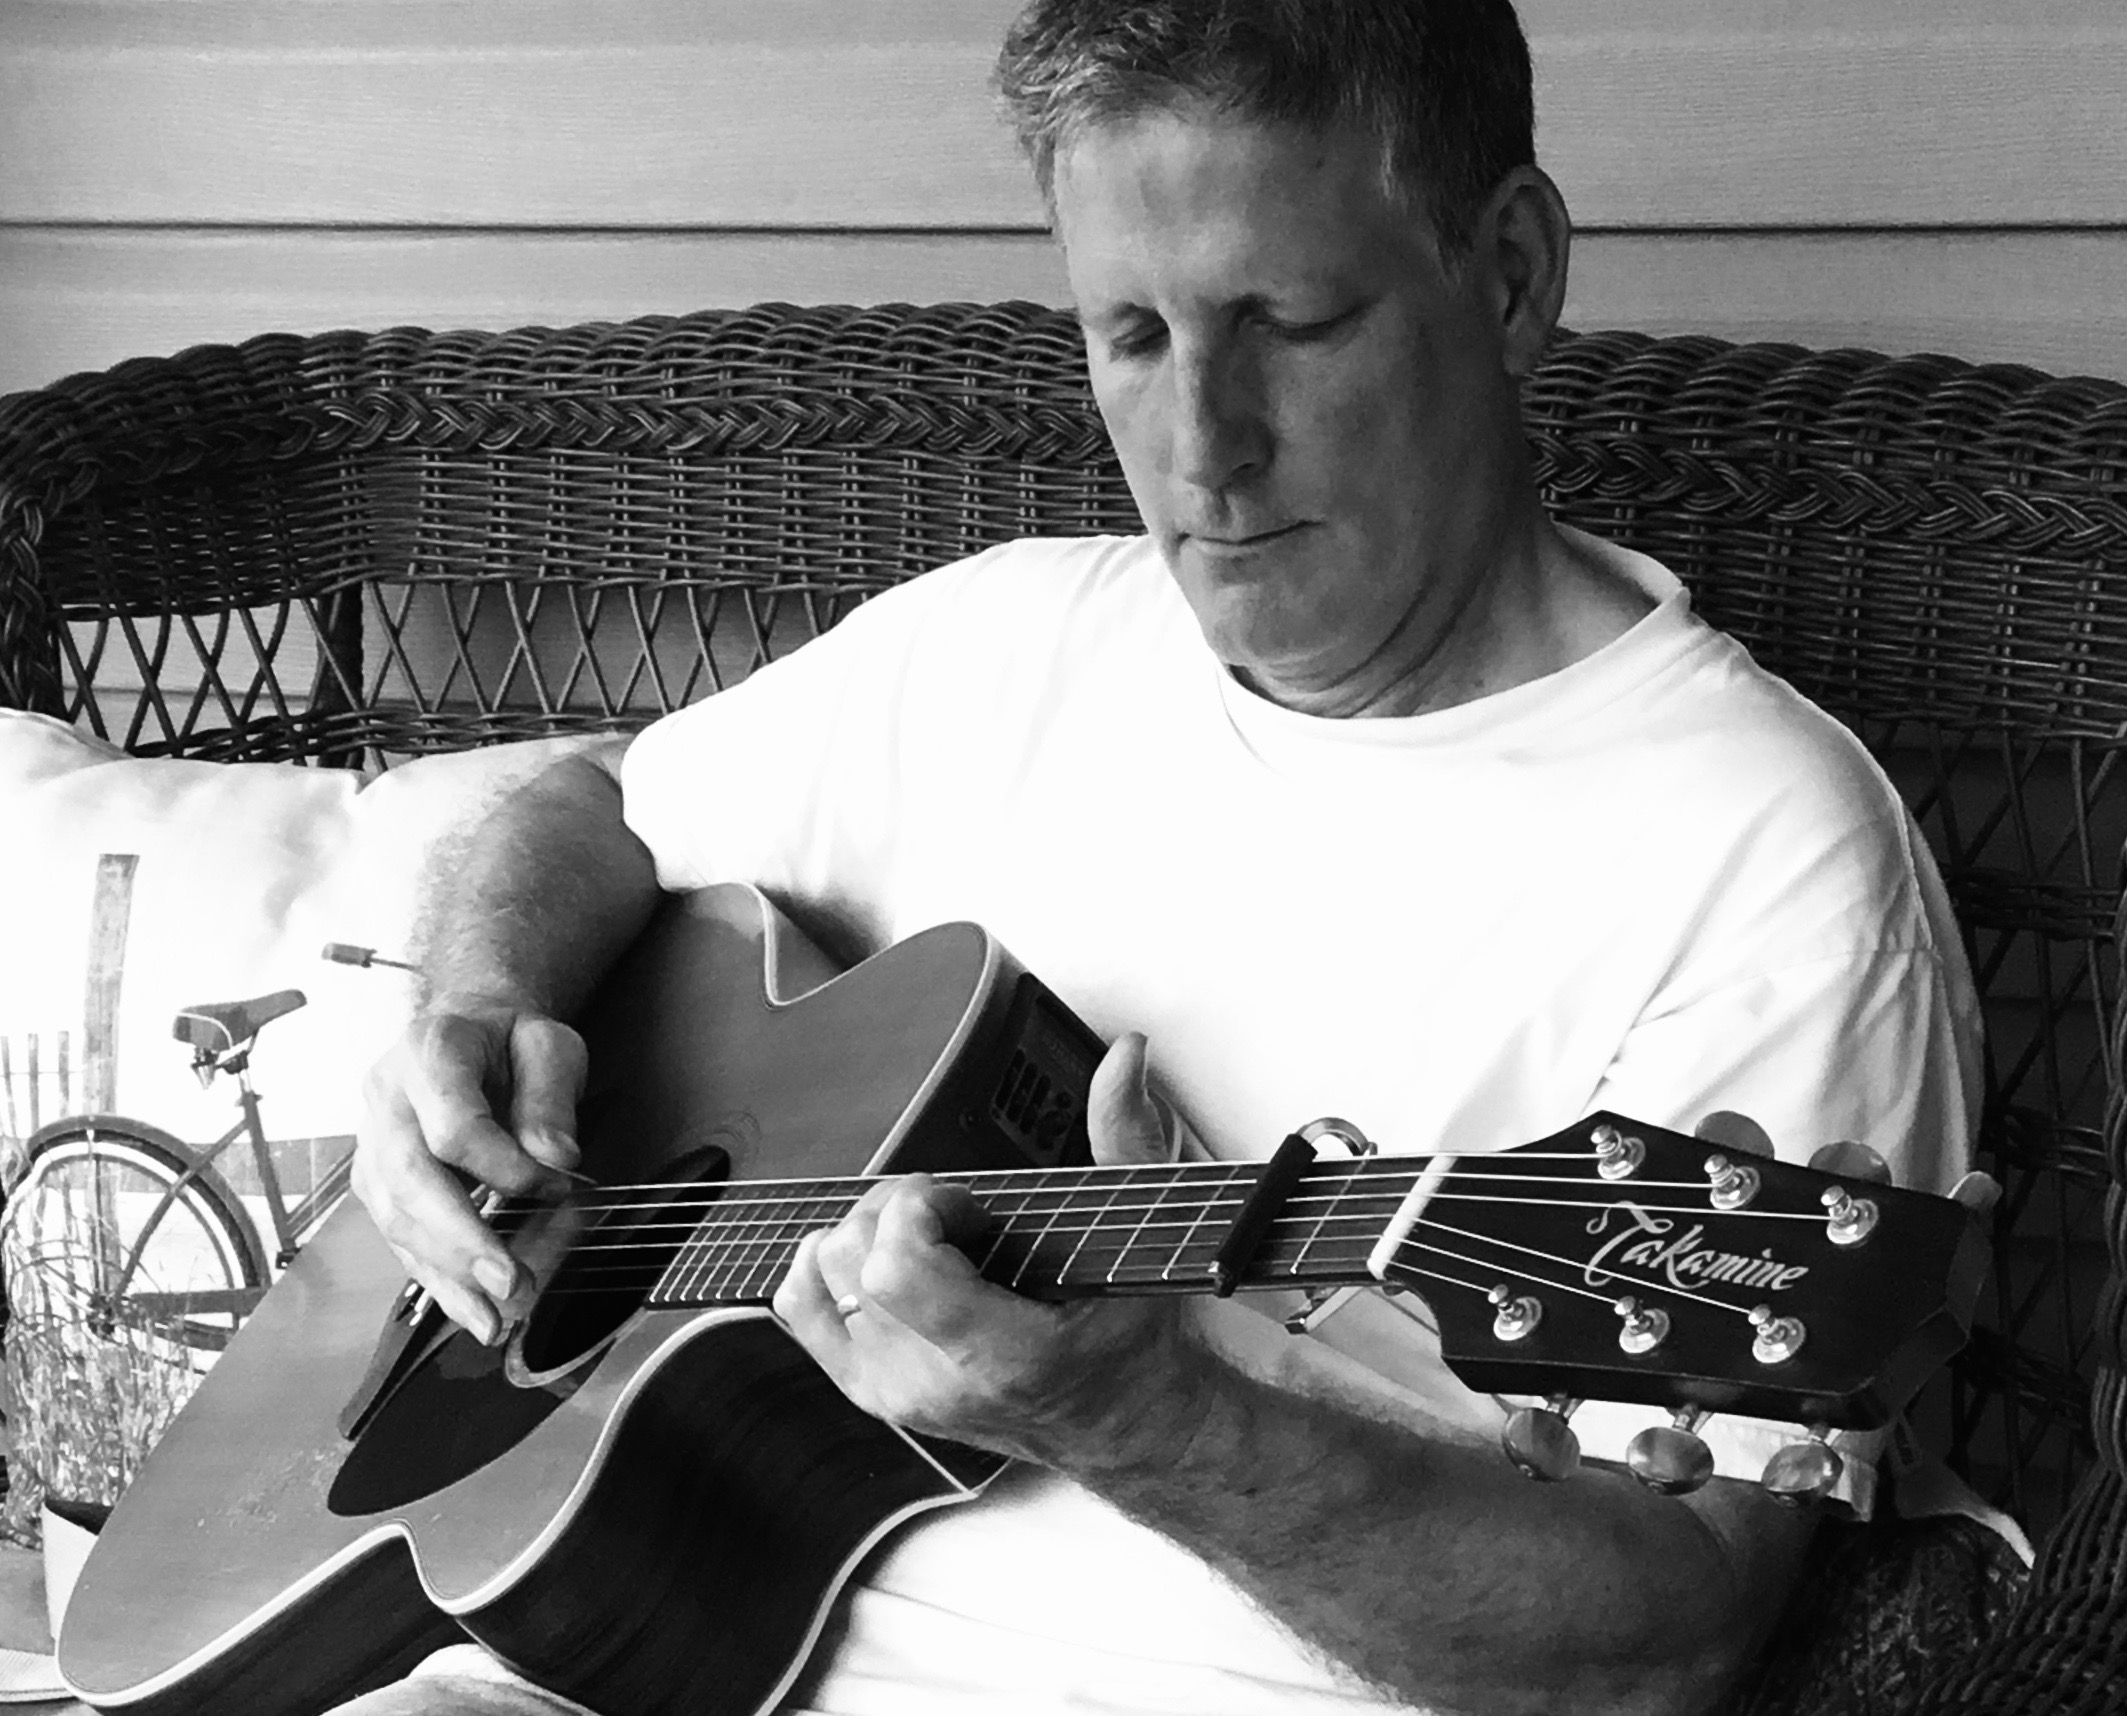 Andy Carignan seated playing acoustic guitar